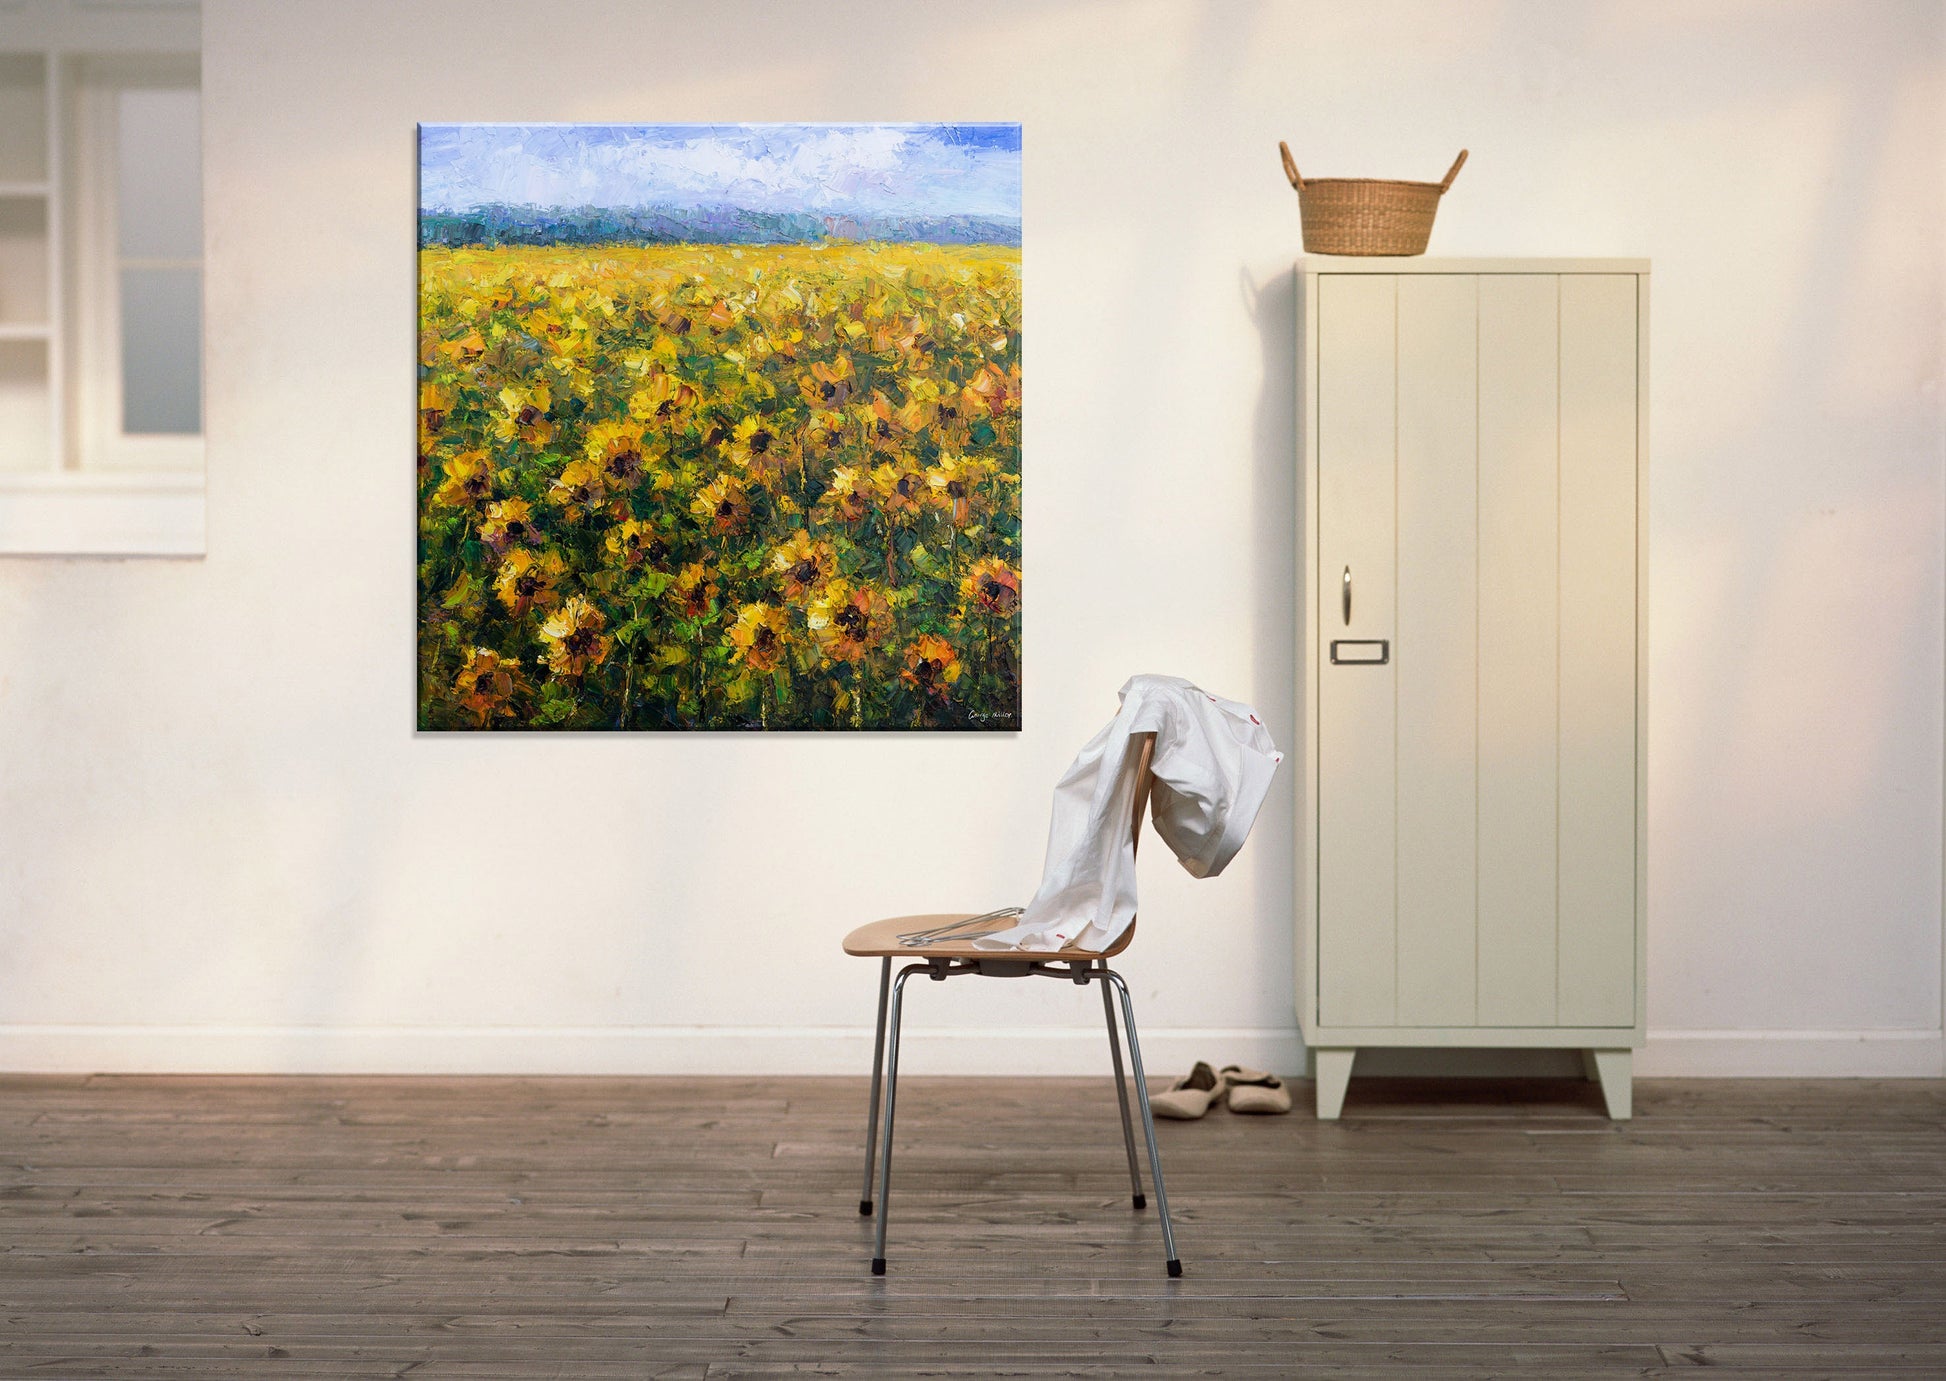 Landscape Painting, Large Oil Painting, Sunflower Fields, Abstract Painting, Original Art, Canvas Art, Family Wall Decor, GeorgeMillerArt